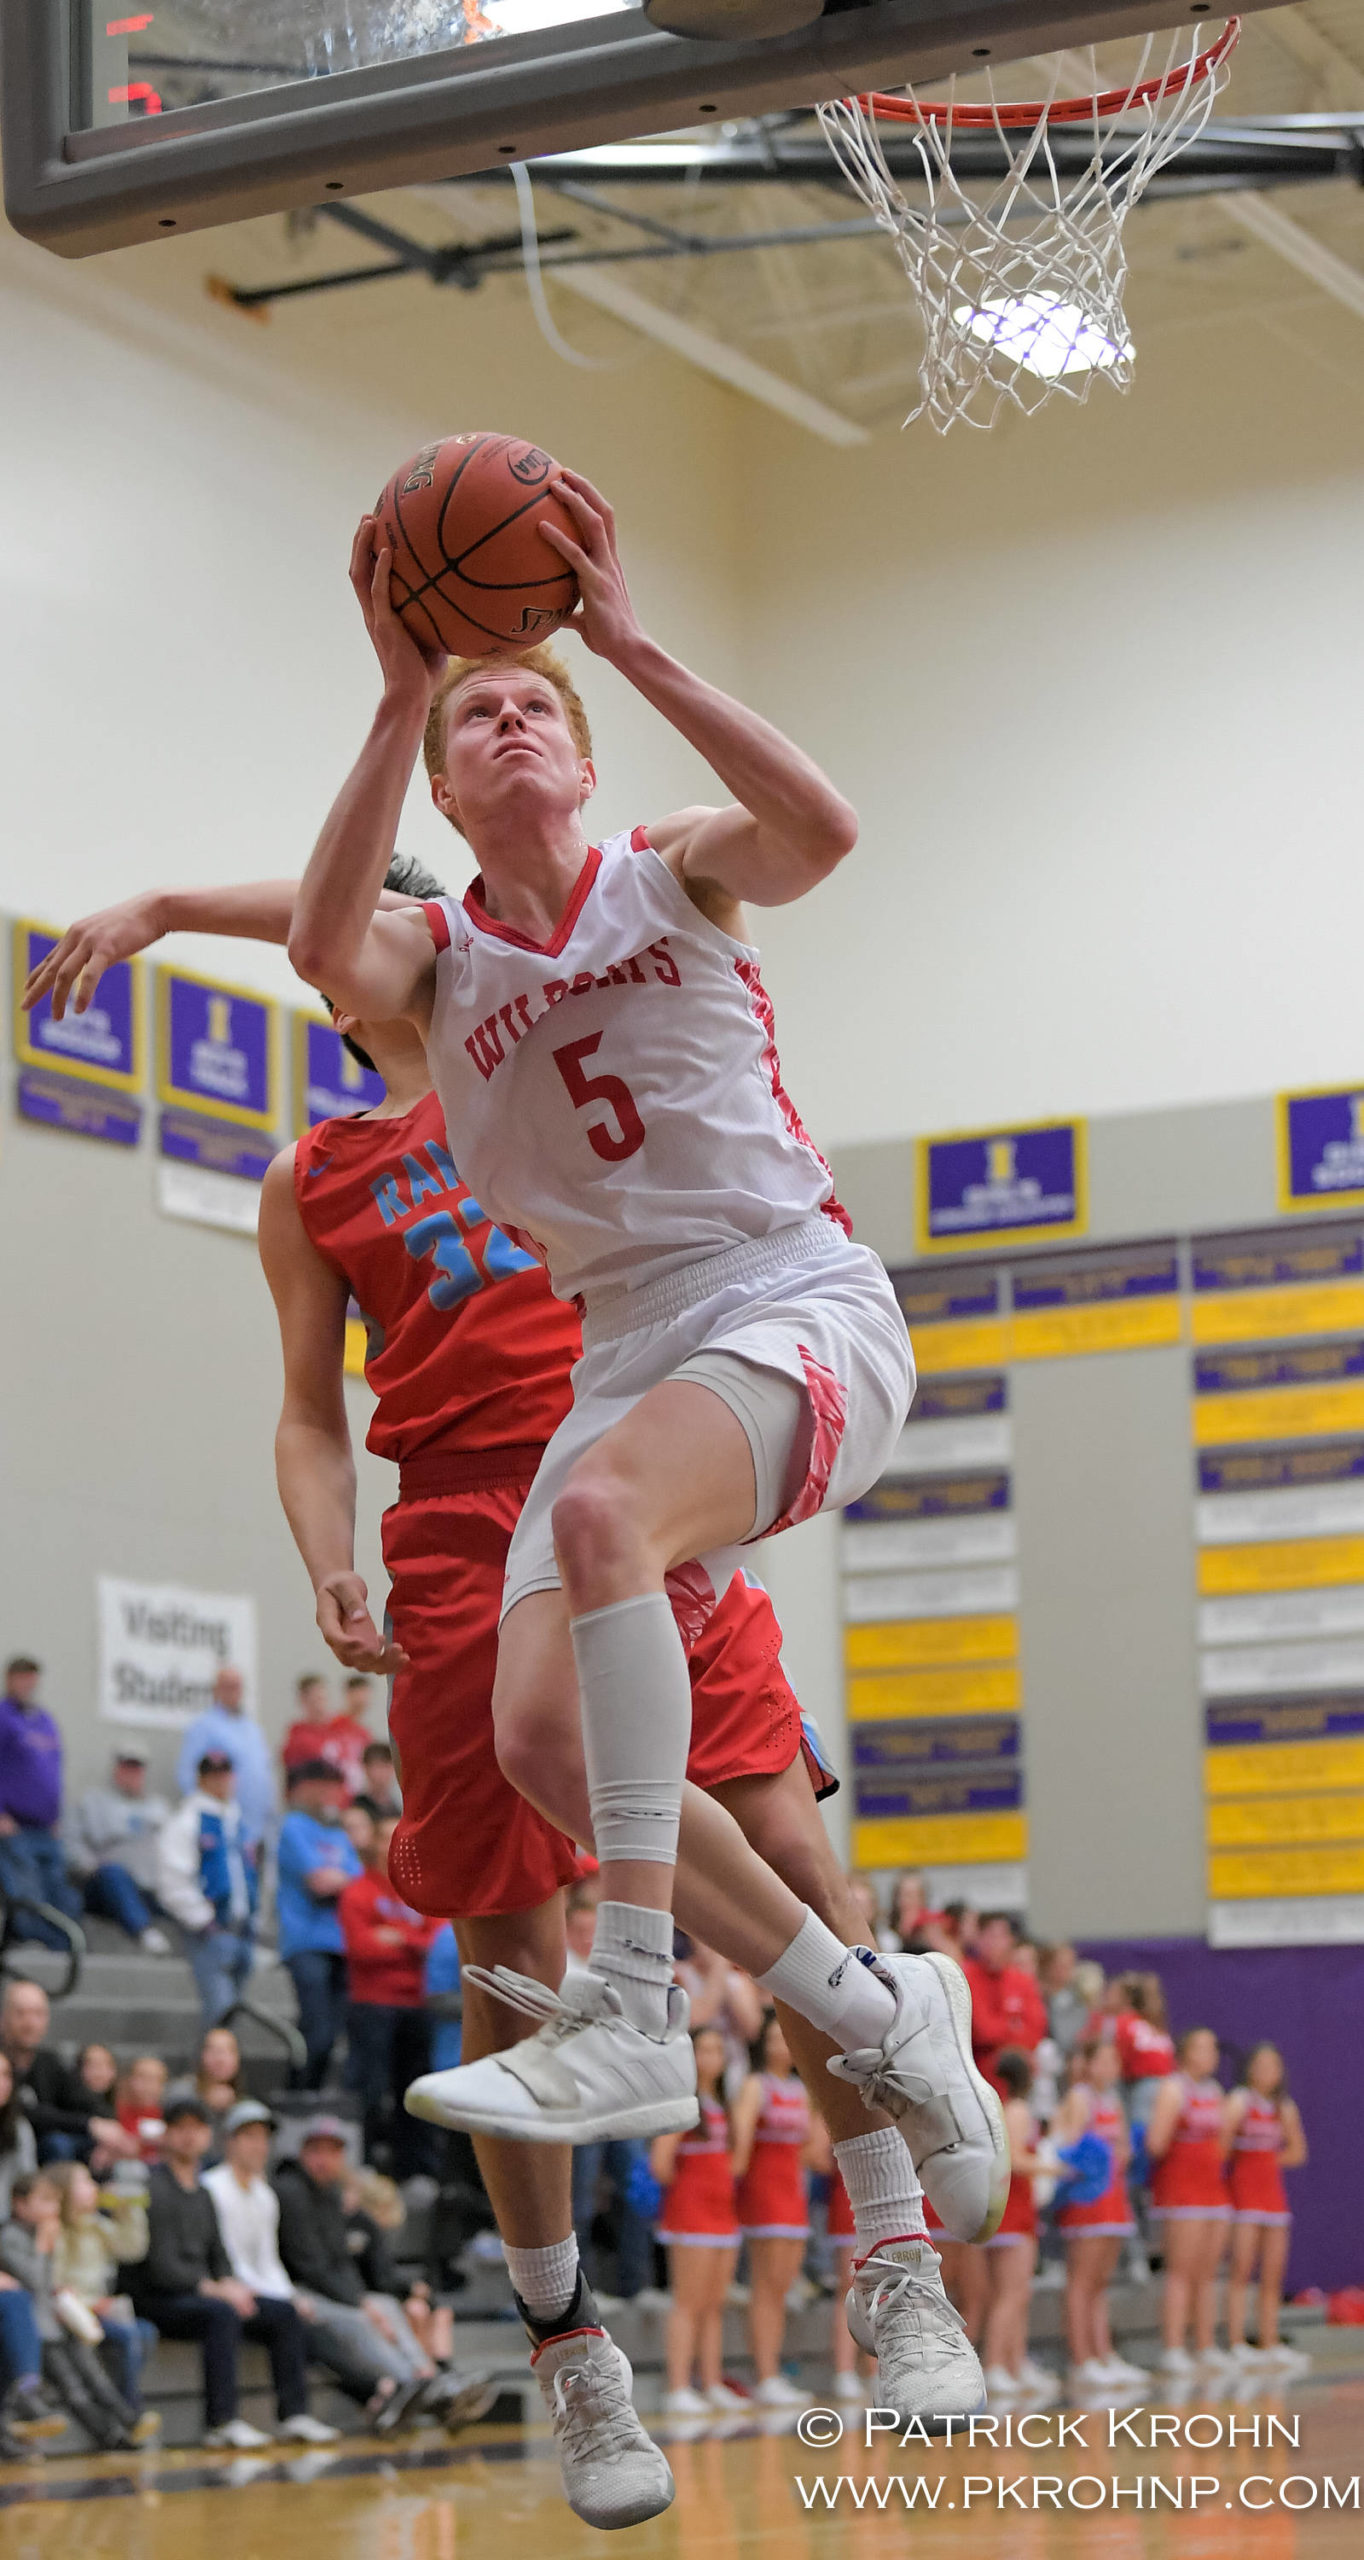 Mount Si’s Jabe Mullins flies to the hoop against West Valley on Saturday at Issaquah High. Photo courtesy of Patrick Krohn